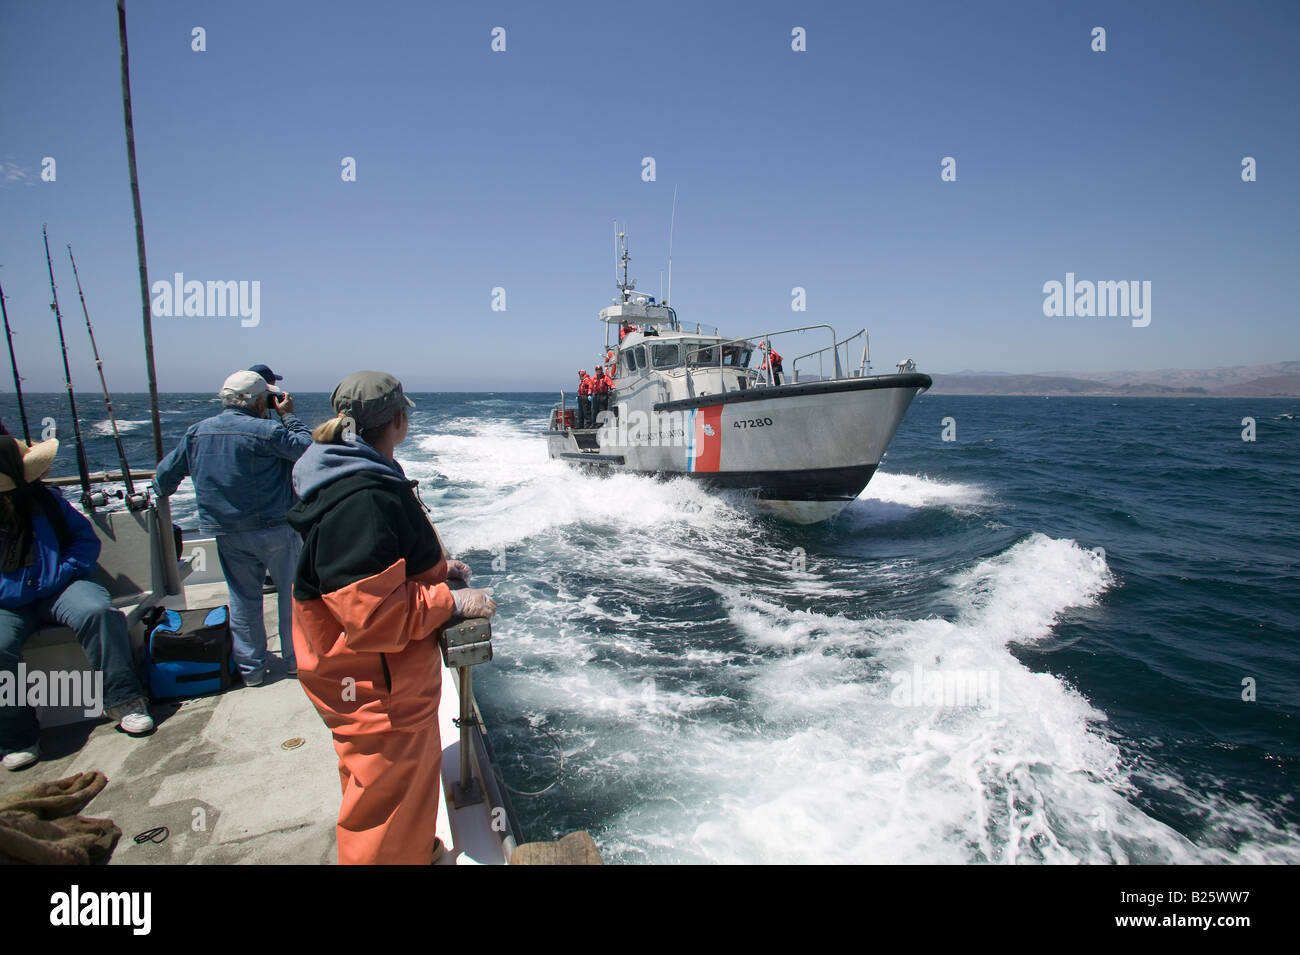 United States Coast Guard prepares to board another boat Stock Photo